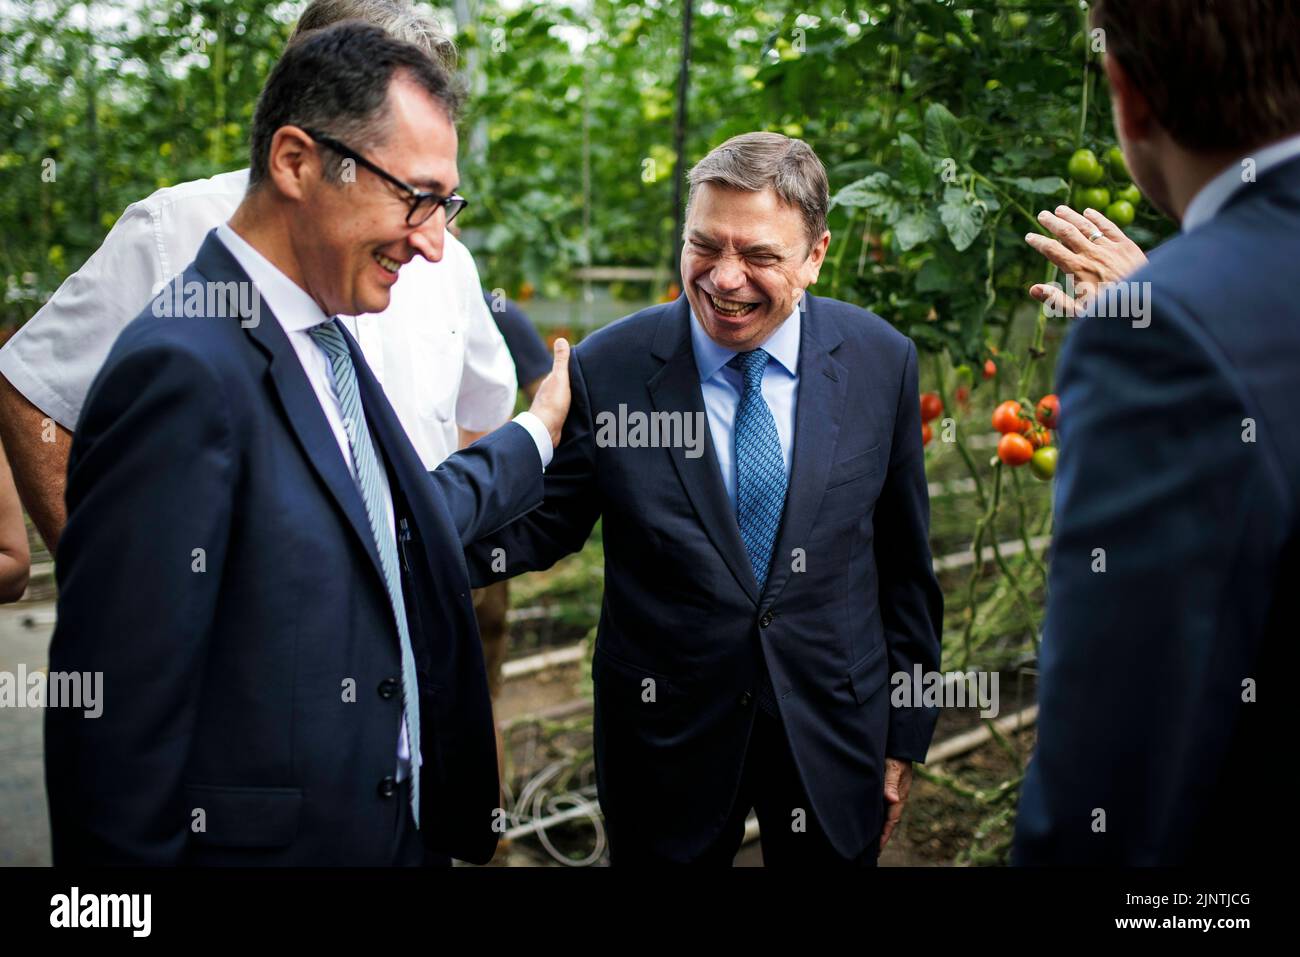 Nuremberg, Deutschland. 26th July, 2022. Cem Oezdemir, Federal Minister of Agriculture and Food, (L) visiting the Nuremberg Garlic Country (largest contiguous vegetable growing region of its kind in Germany) together with Luis Planas, Minister of Agriculture, Food and Environment of Spain, (R). Nuremberg, July 26, 2022. Credit: dpa/Alamy Live News Stock Photo